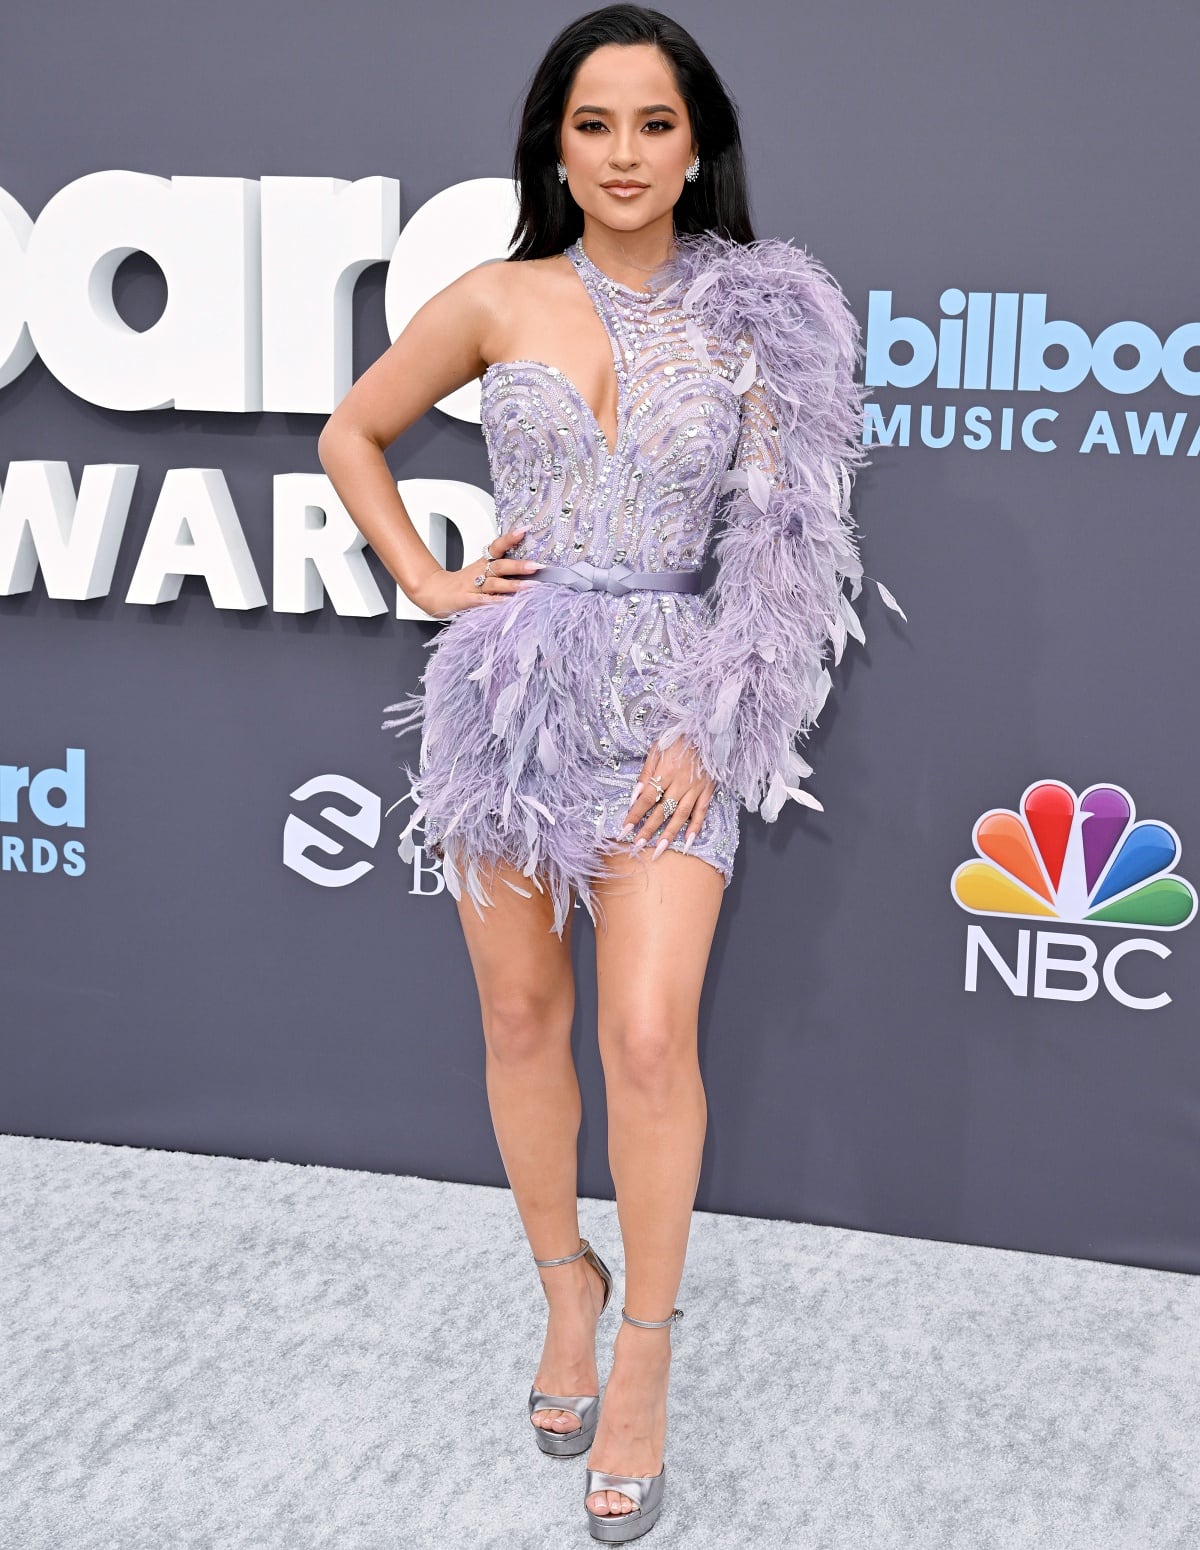 Becky G in a Zuhair Murad dress and silver ankle-strap heels at the 2022 Billboard Music Awards